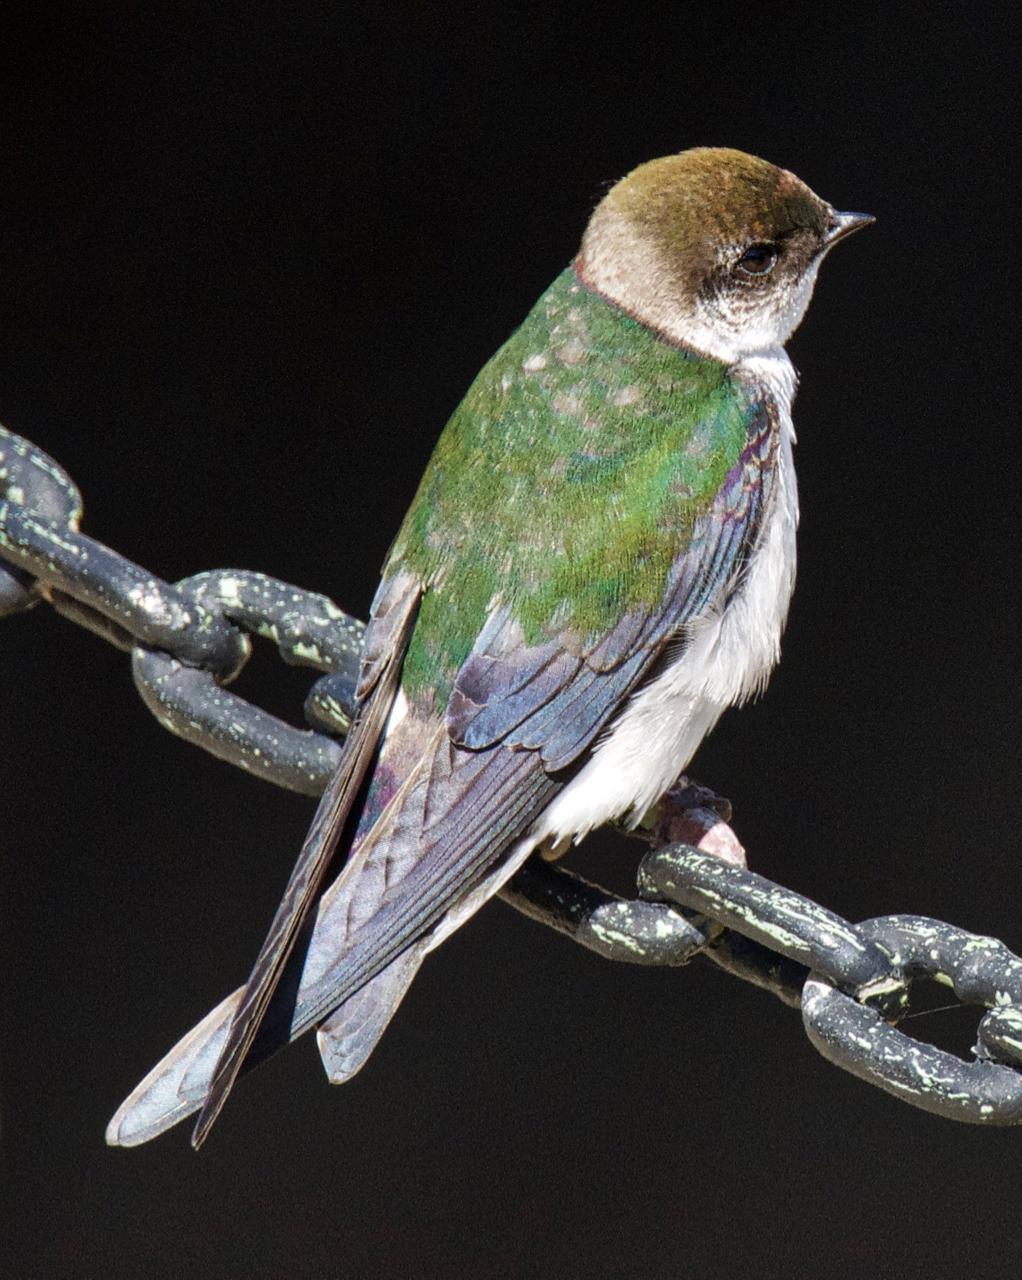 Violet-green Swallow Photo by Brian Avent